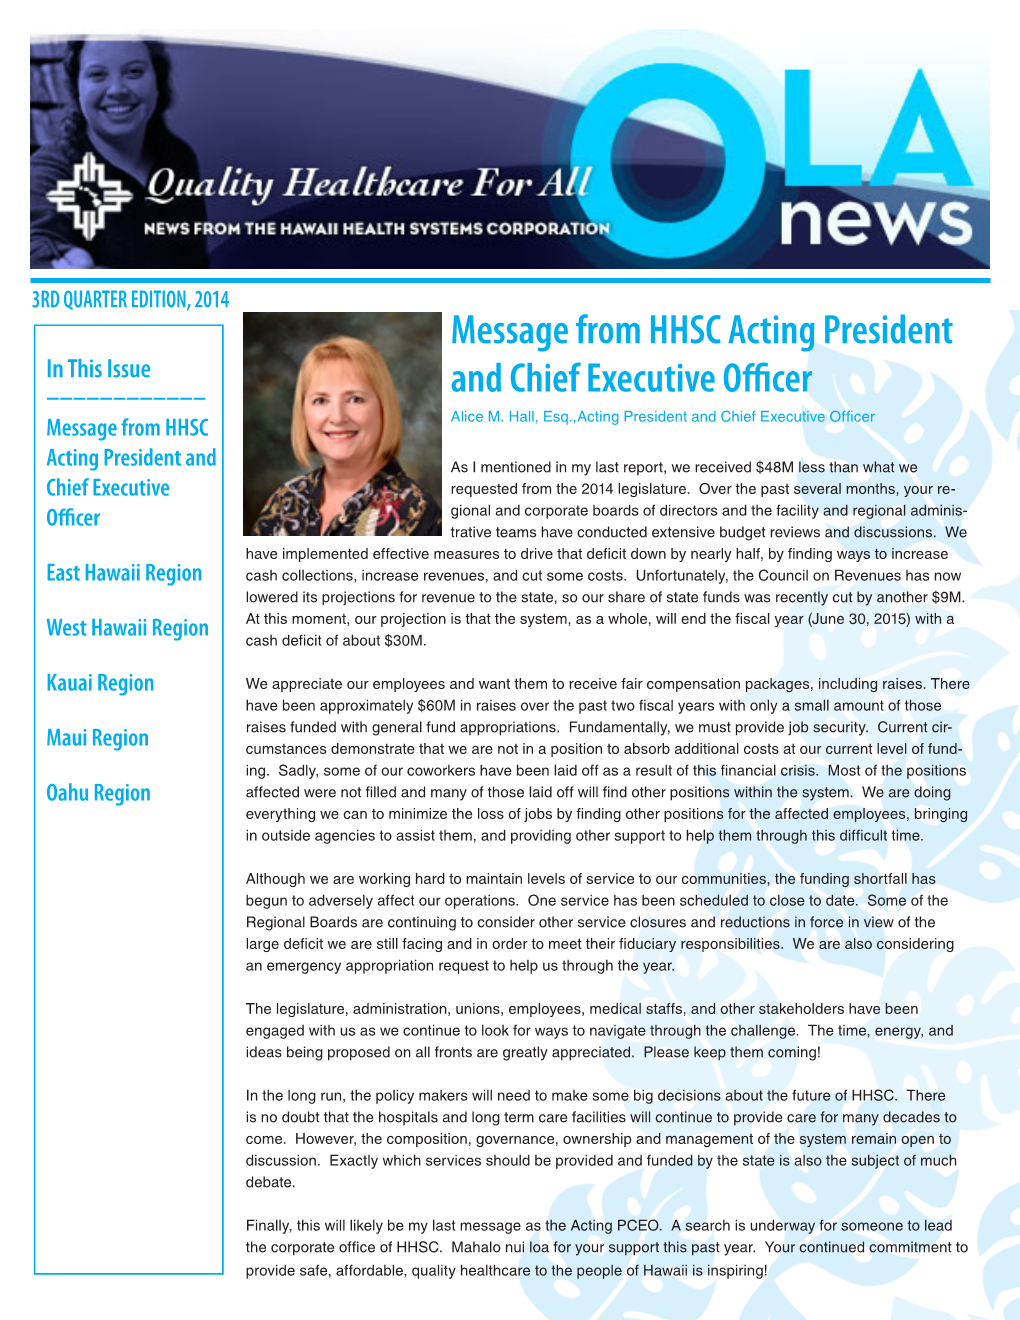 Message from HHSC Acting President and Chief Executive Officer